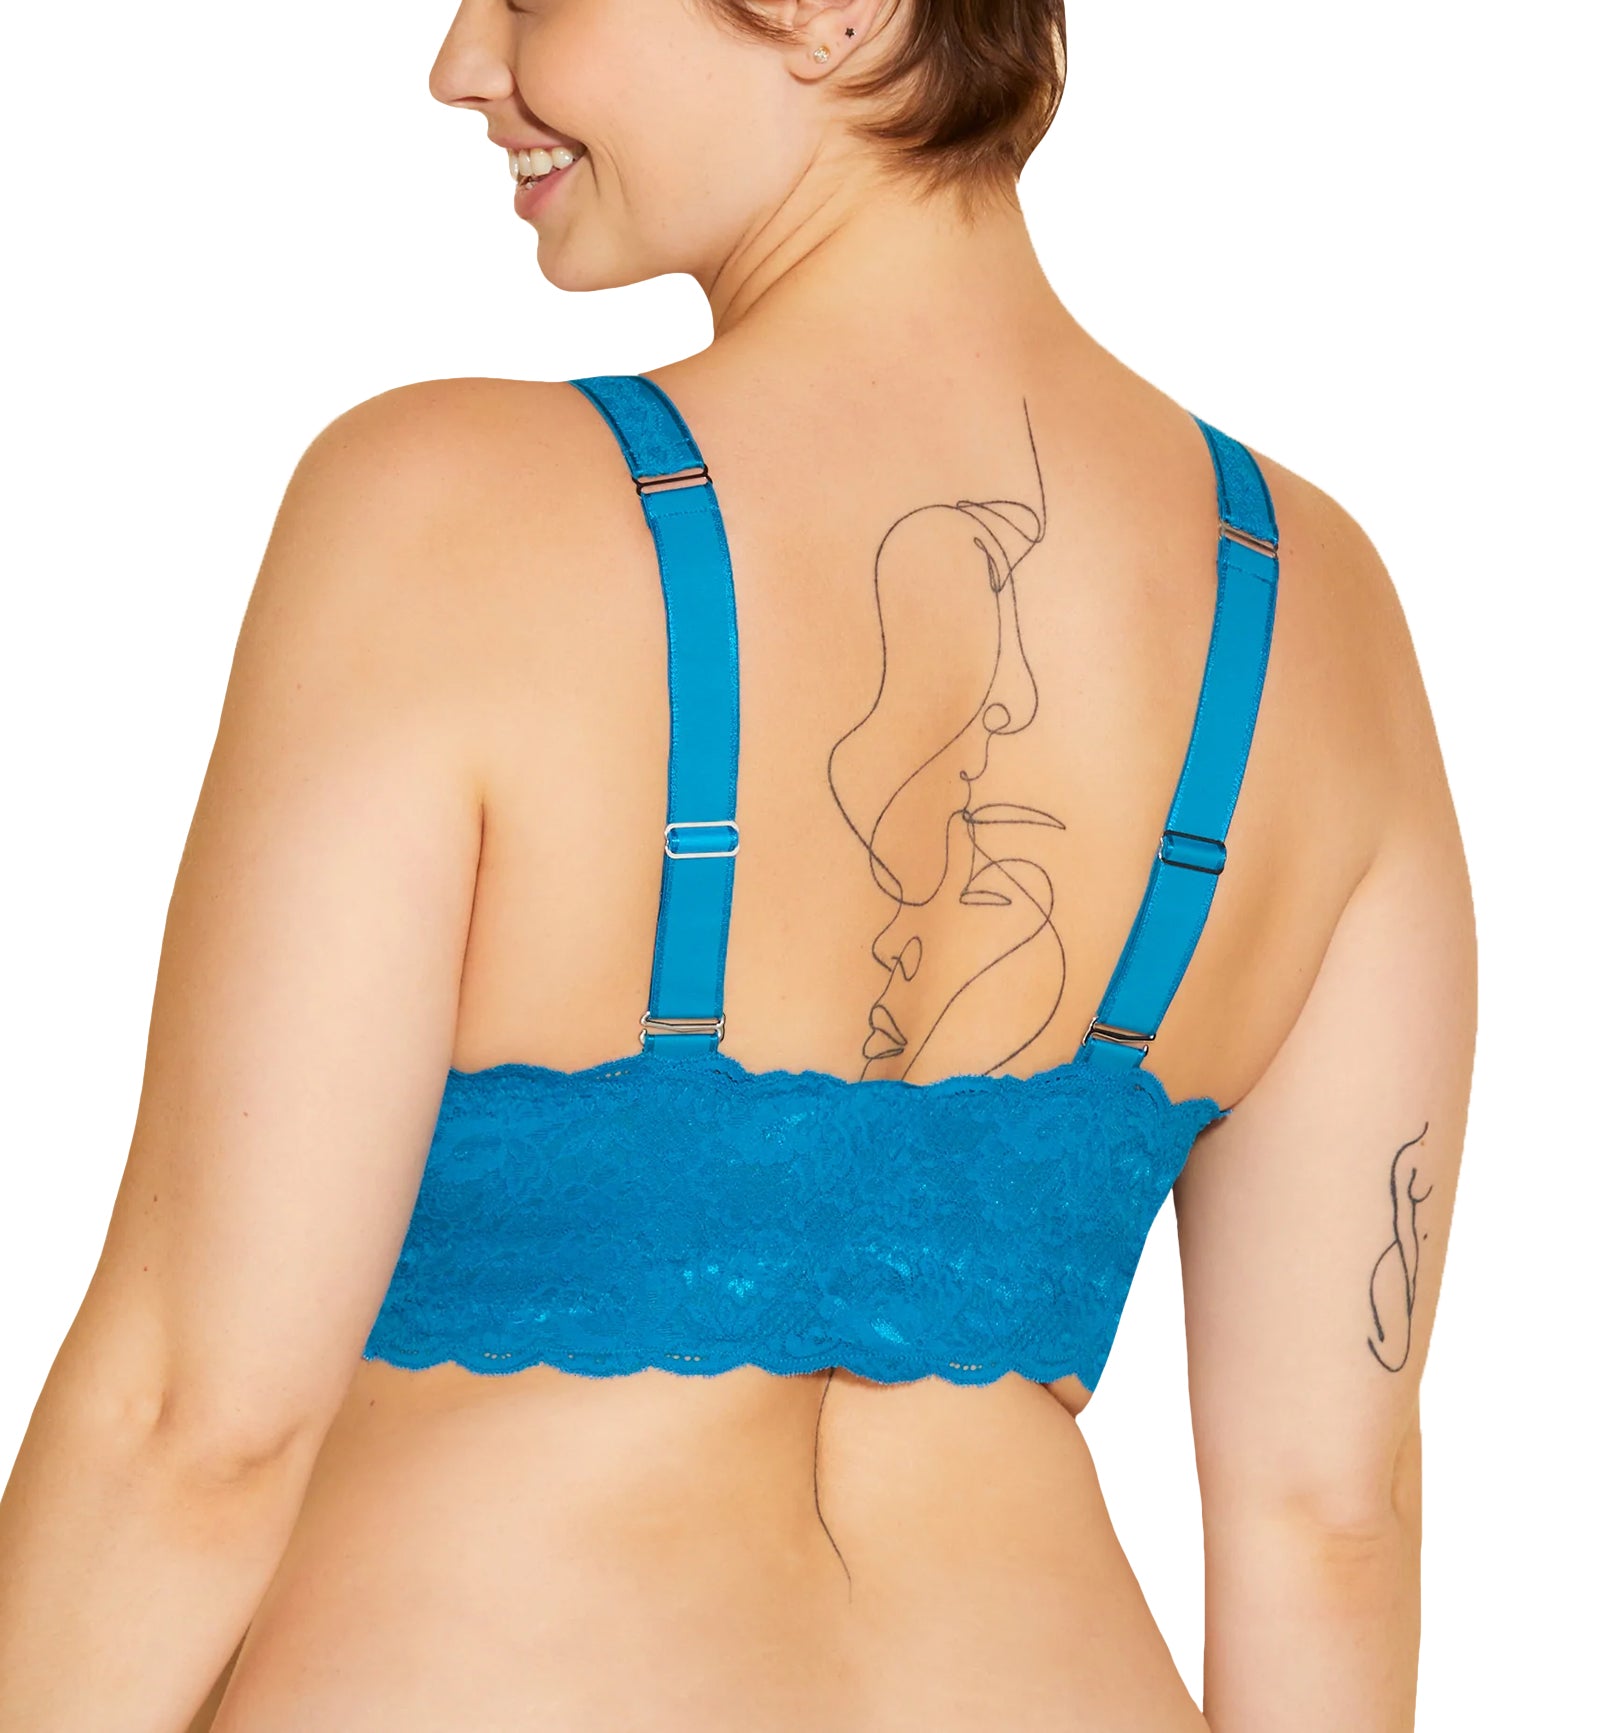 Cosabella NSN SUPER CURVY Sweetie Bralette (NEVER1340),XS,Udaipur Blue - Udaipur Blue,X-Small